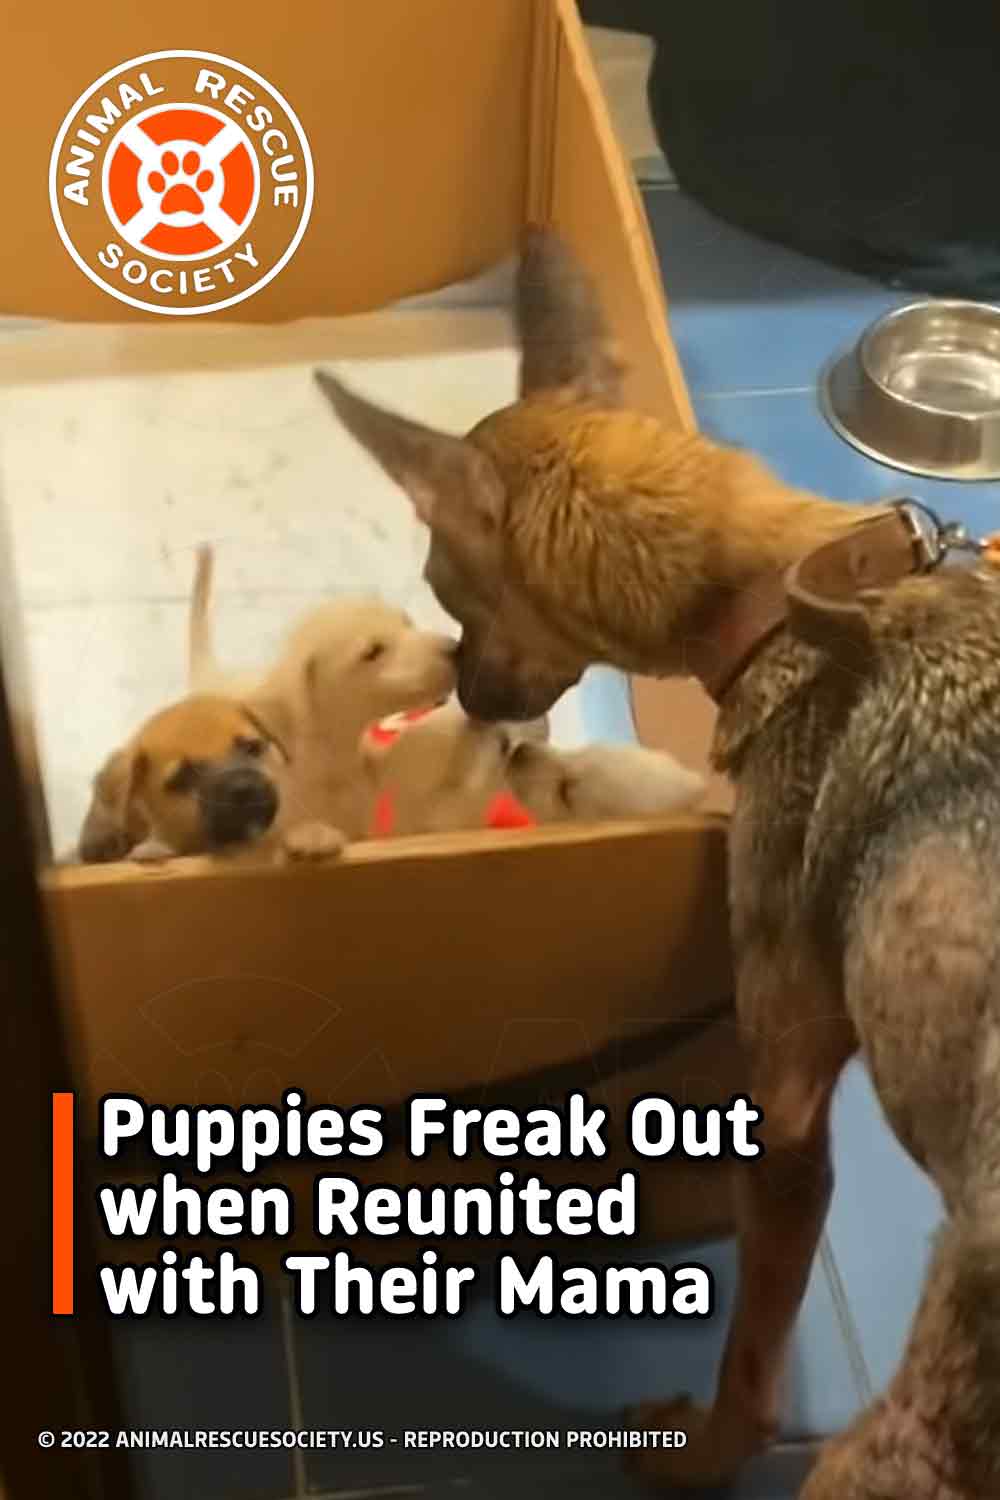 Puppies freak out when reunited with their mama